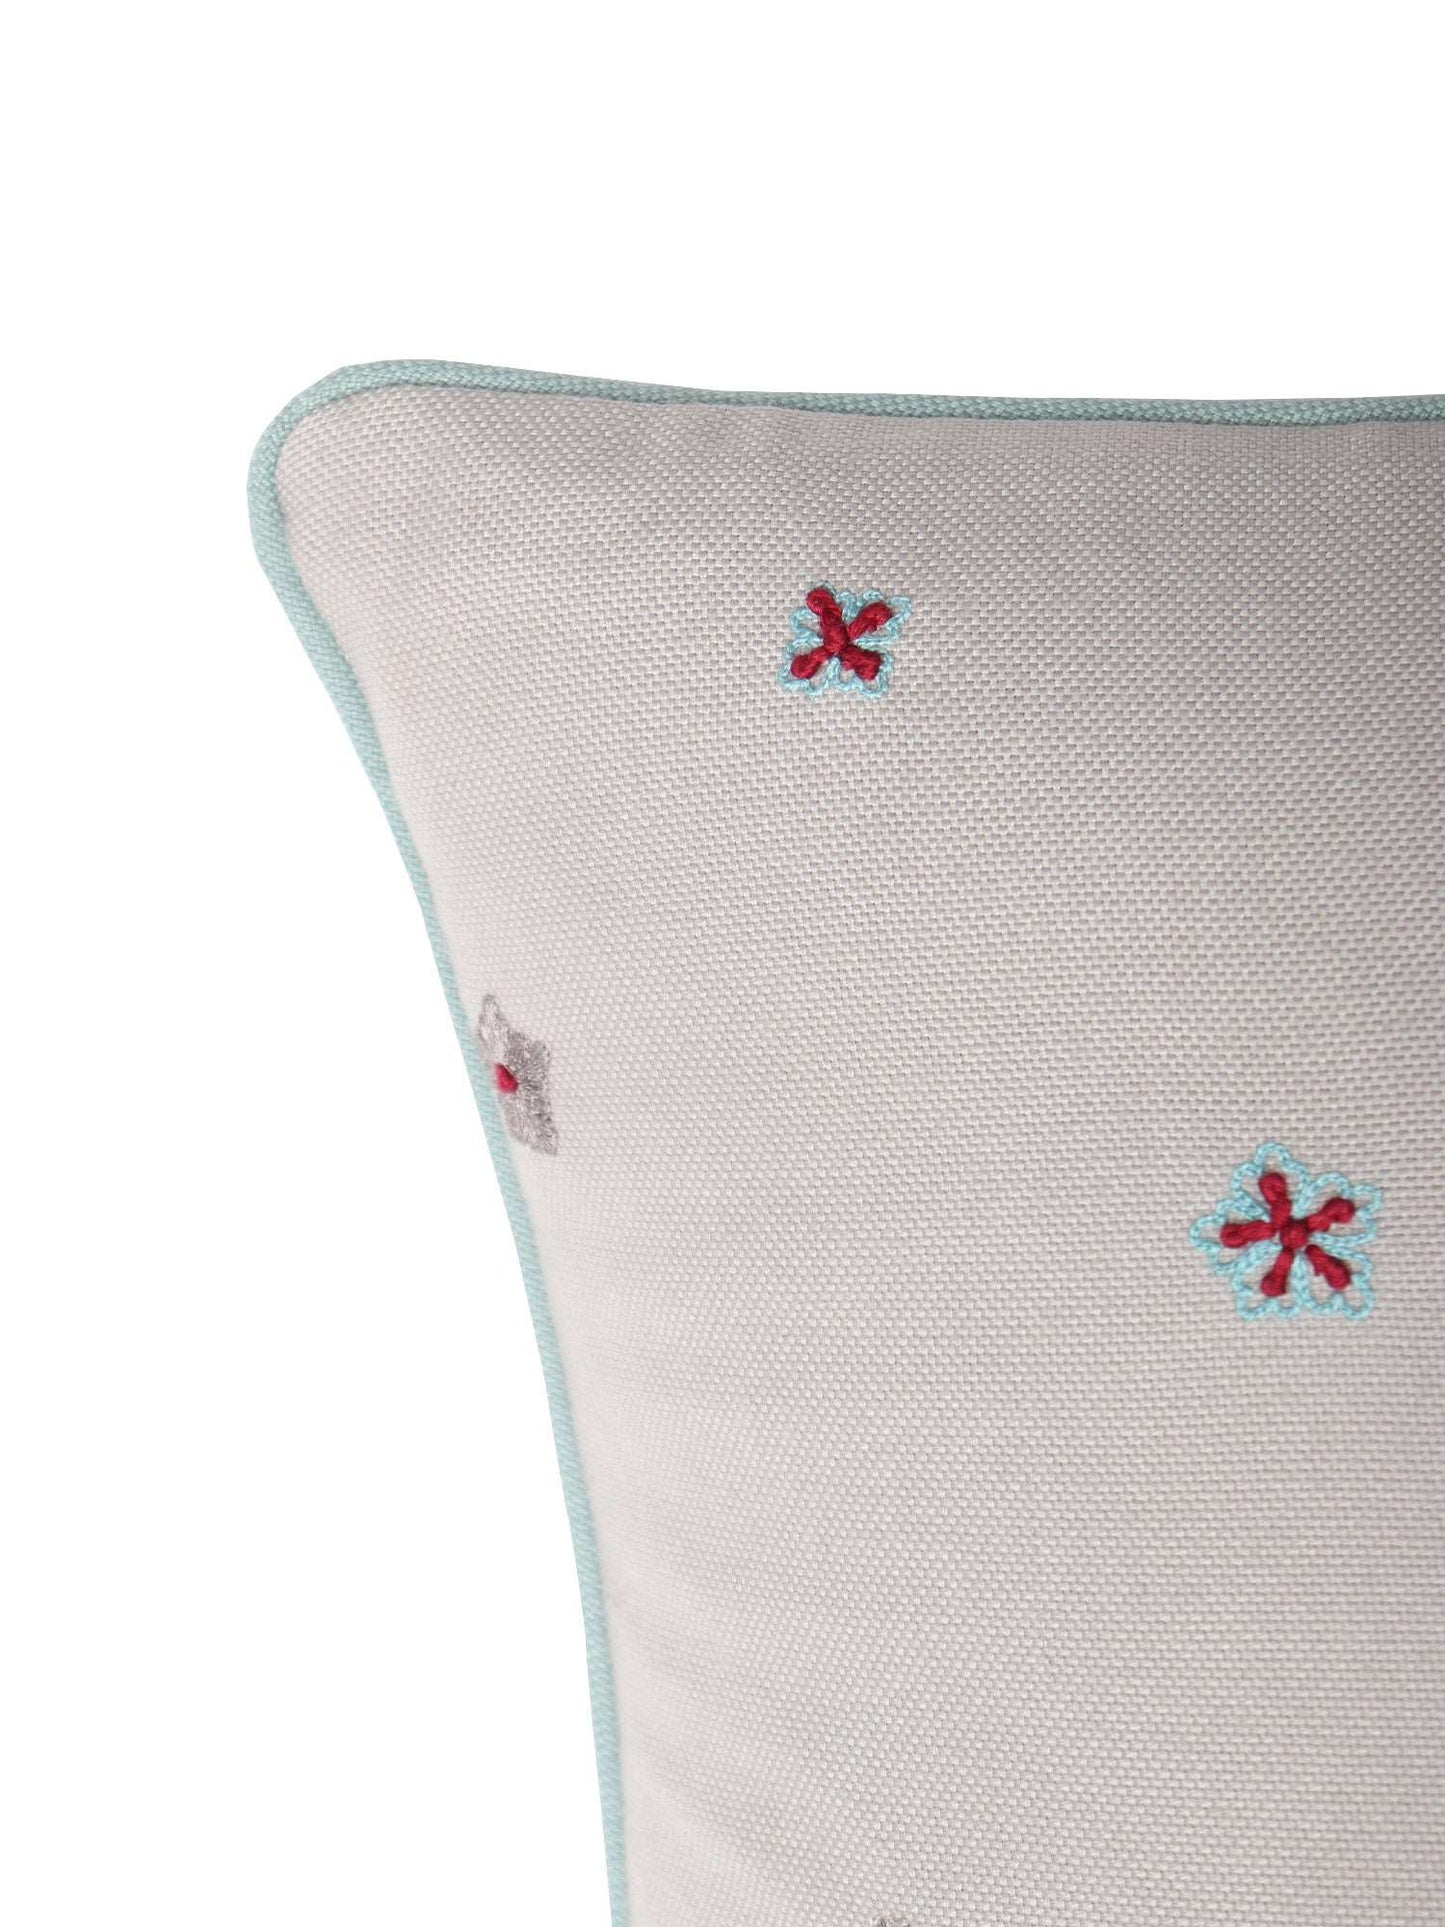 Cushion Cover Cotton Hand Embroidery Grey - 16inches X 16inches